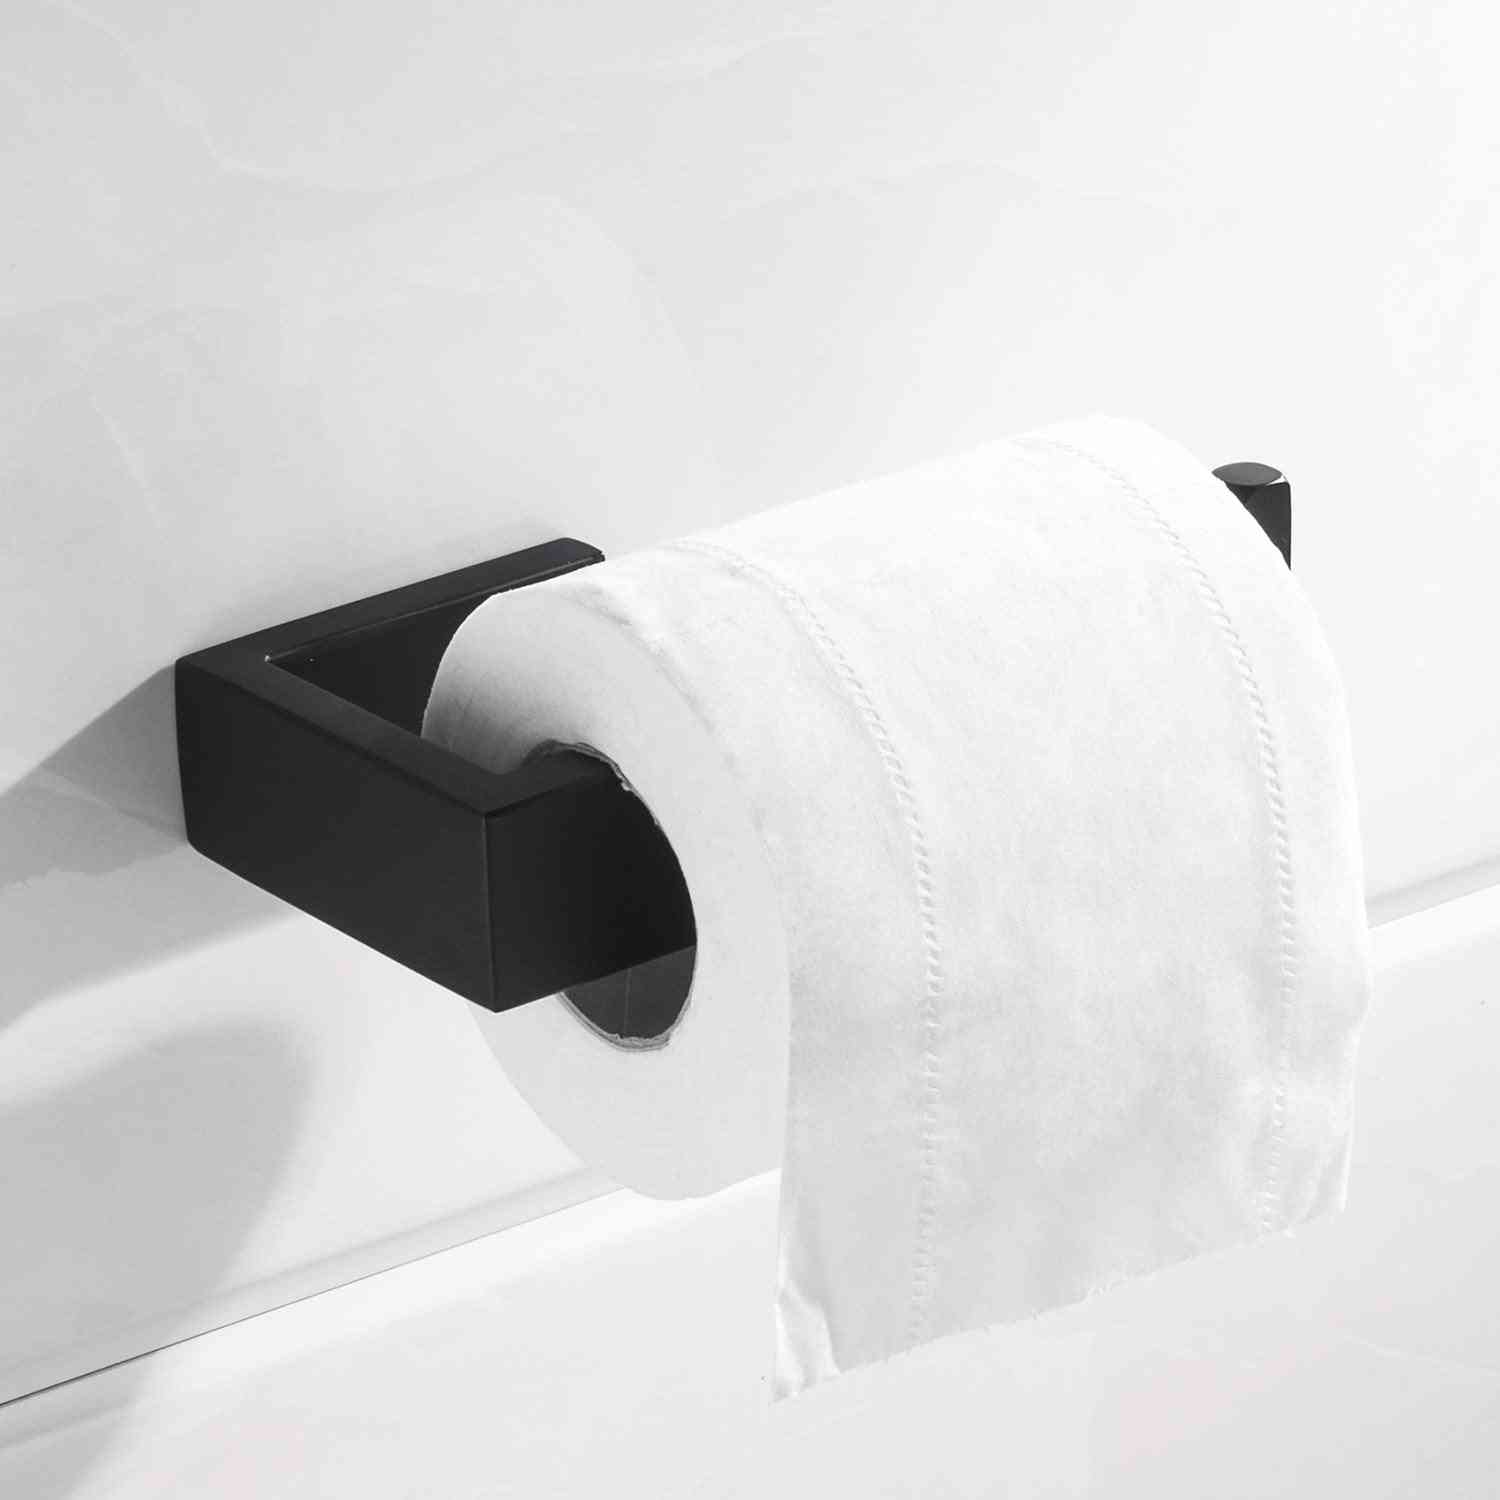 Stainless Steel, Self Adhesive Toilet Roll Holder